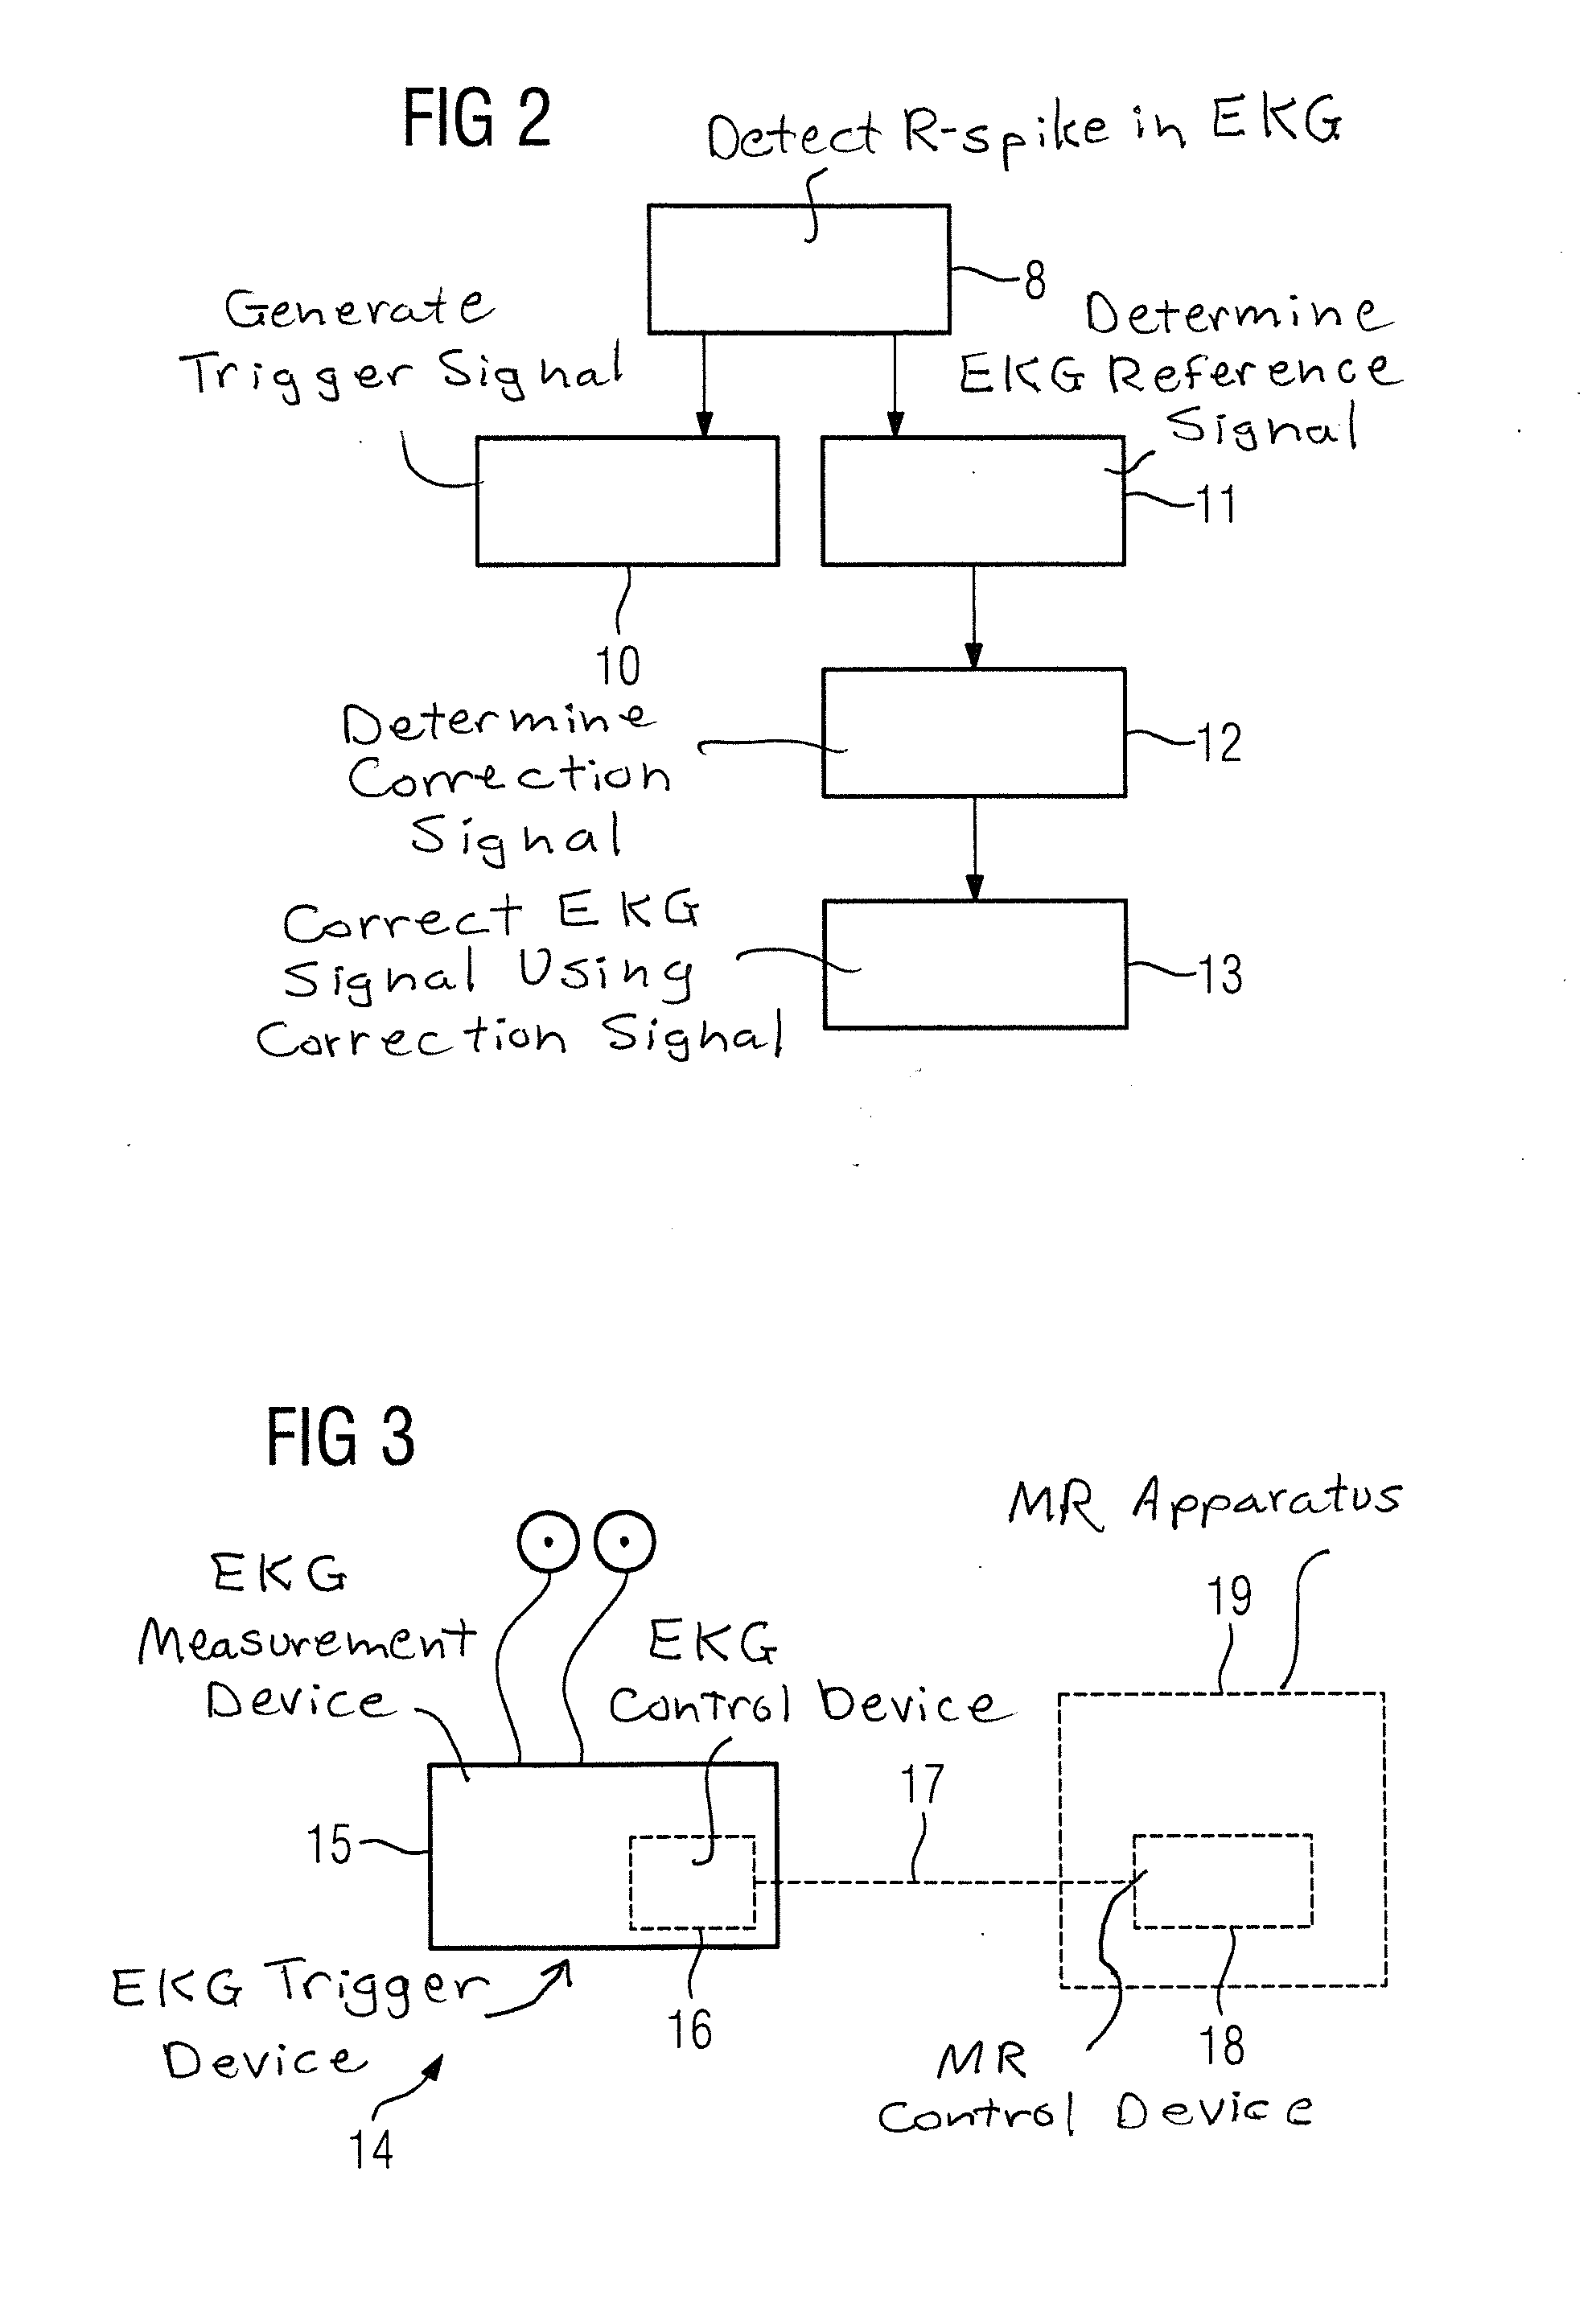 Method and ekg trigger device for correcting an ekg signal in magnetic resonance image acquisition